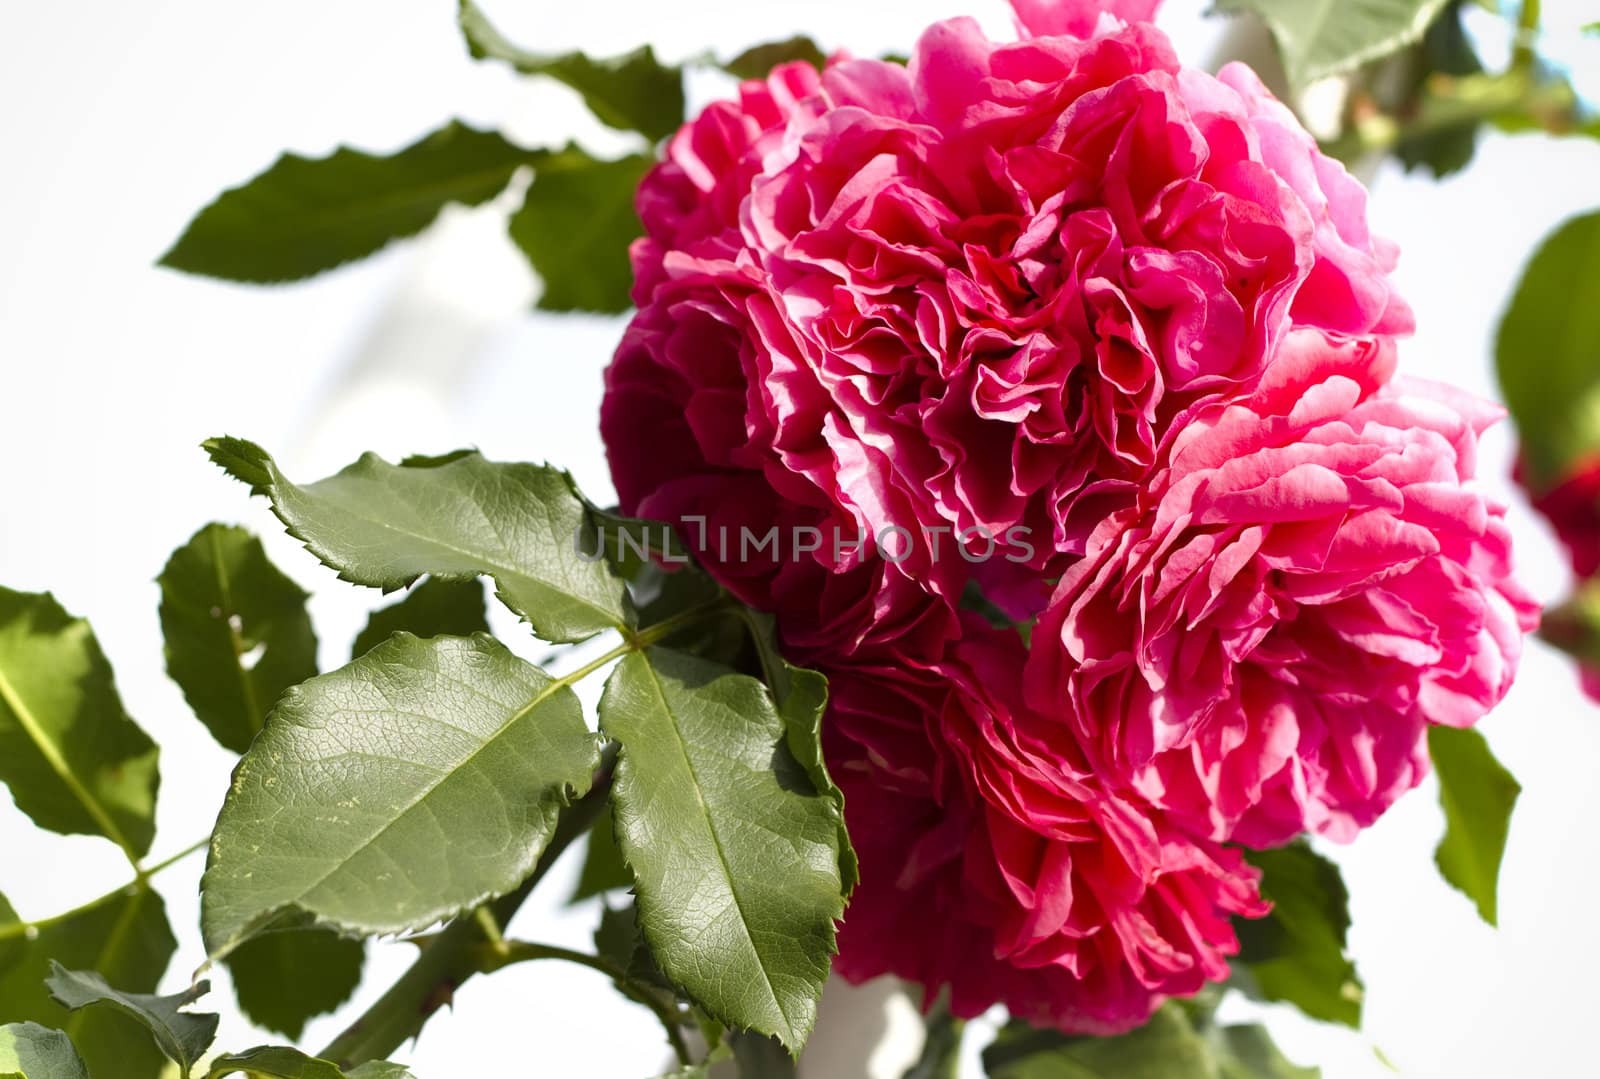 Close up of garden roses on a nature background